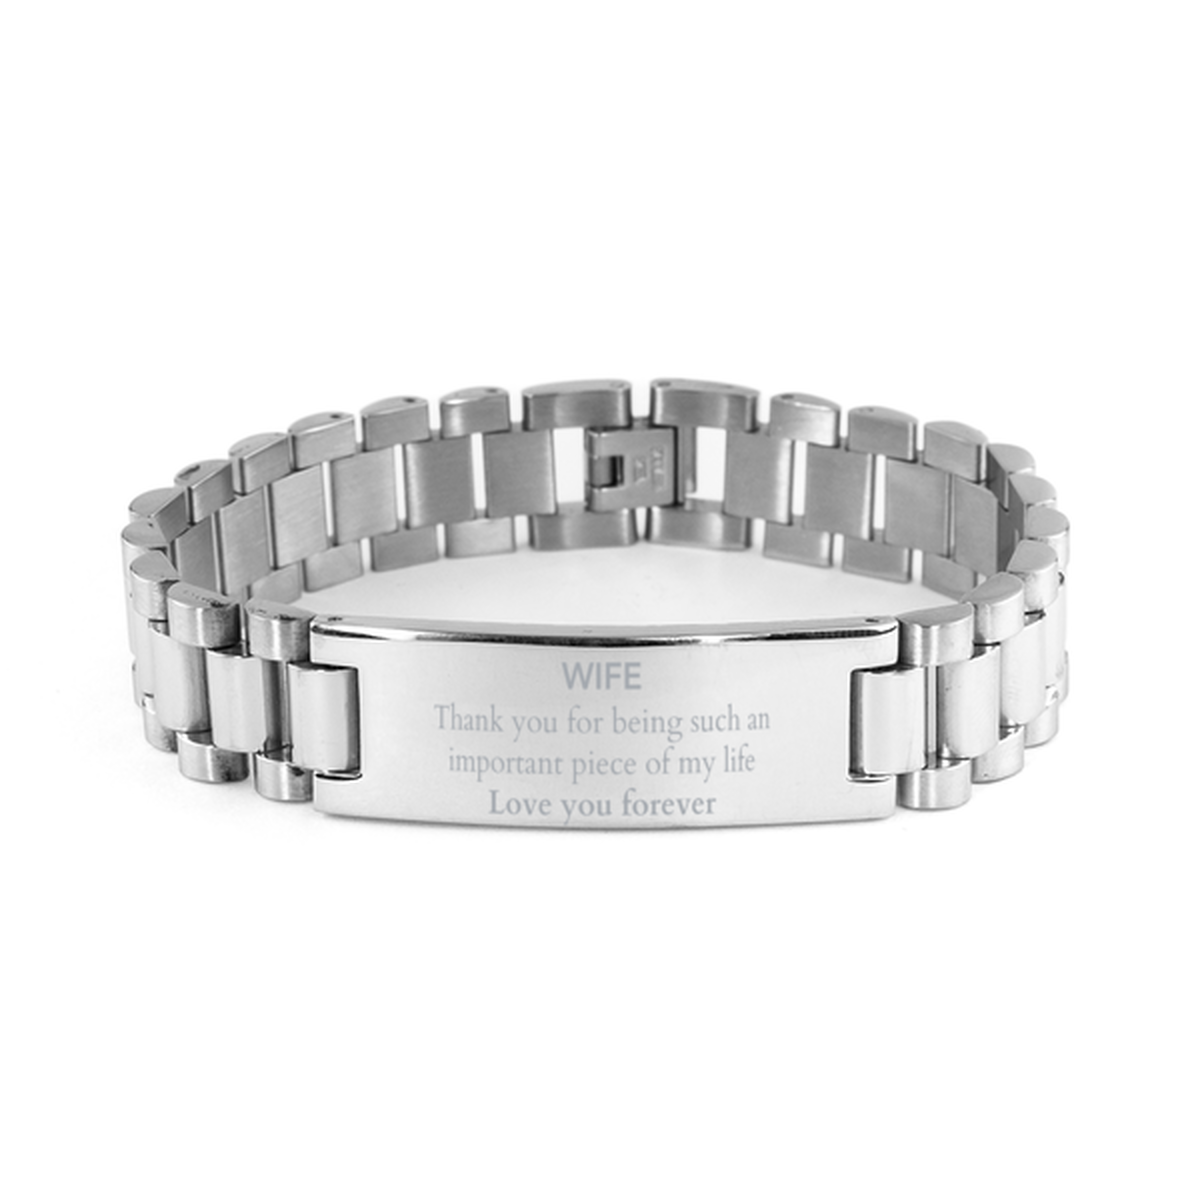 Appropriate Wife Ladder Stainless Steel Bracelet Epic Birthday Gifts for Wife Thank you for being such an important piece of my life Wife Christmas Mothers Fathers Day